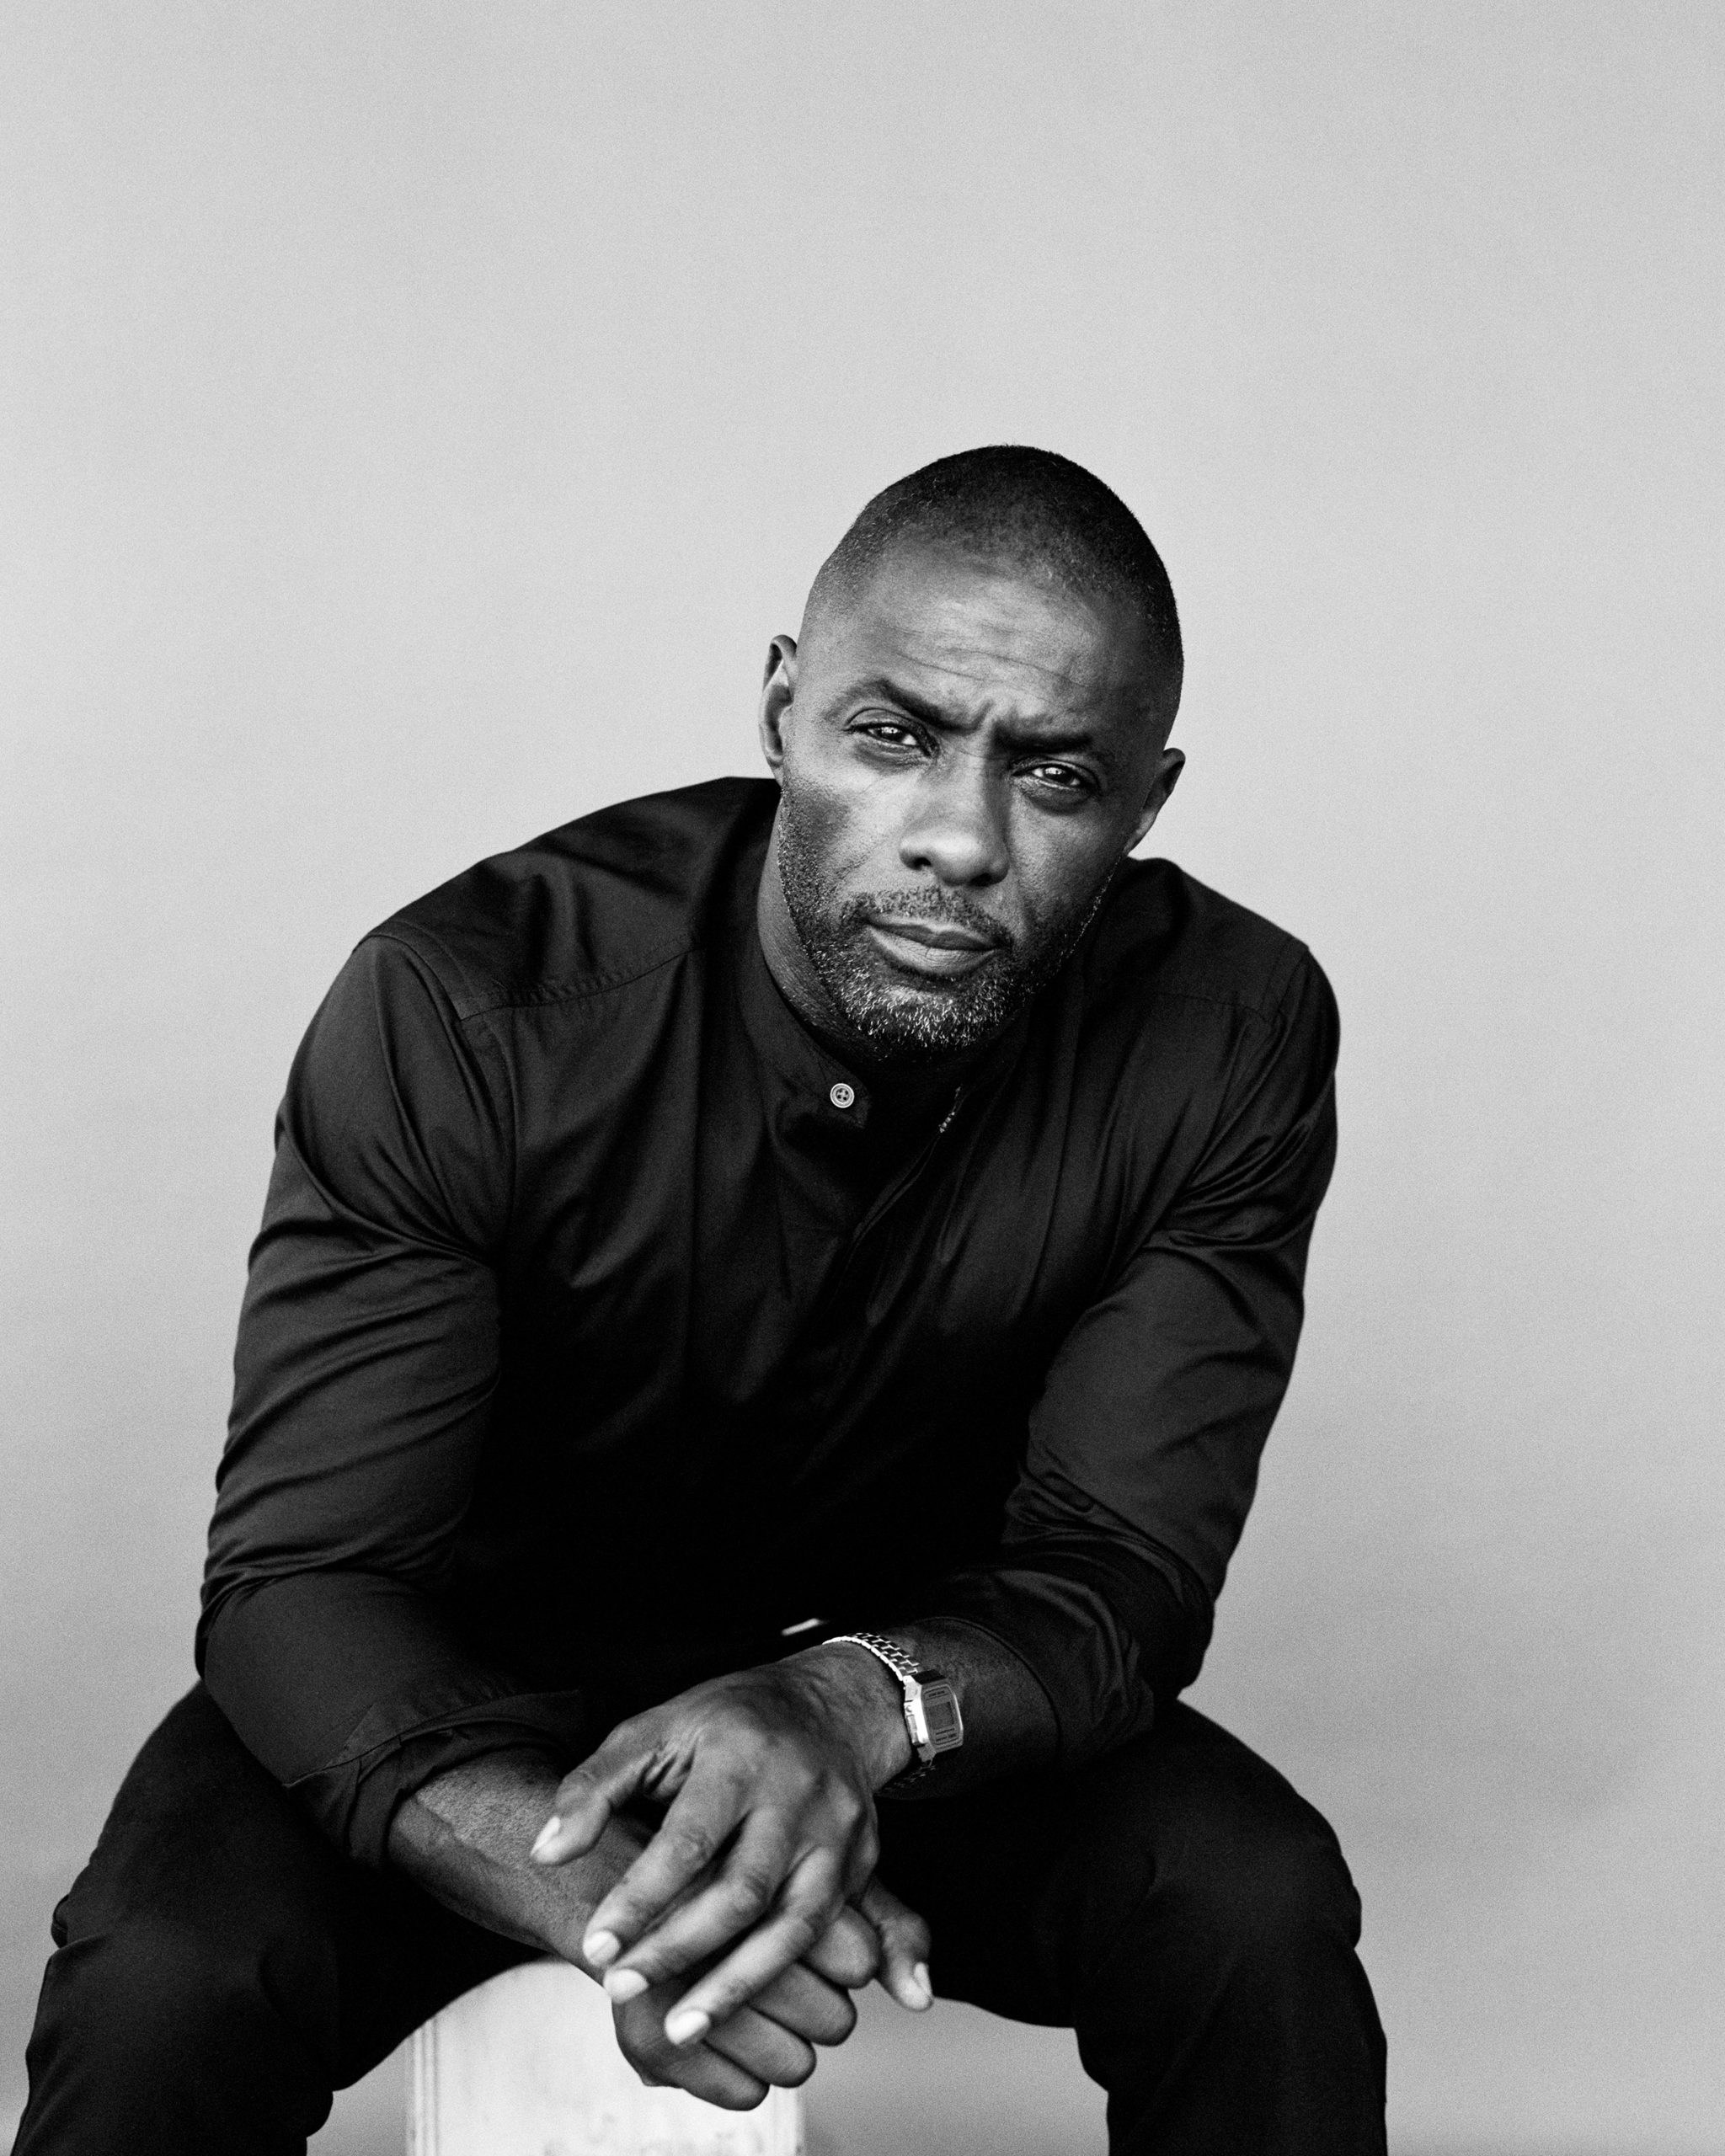 The New York Times - Idris Elba - Making Pictures